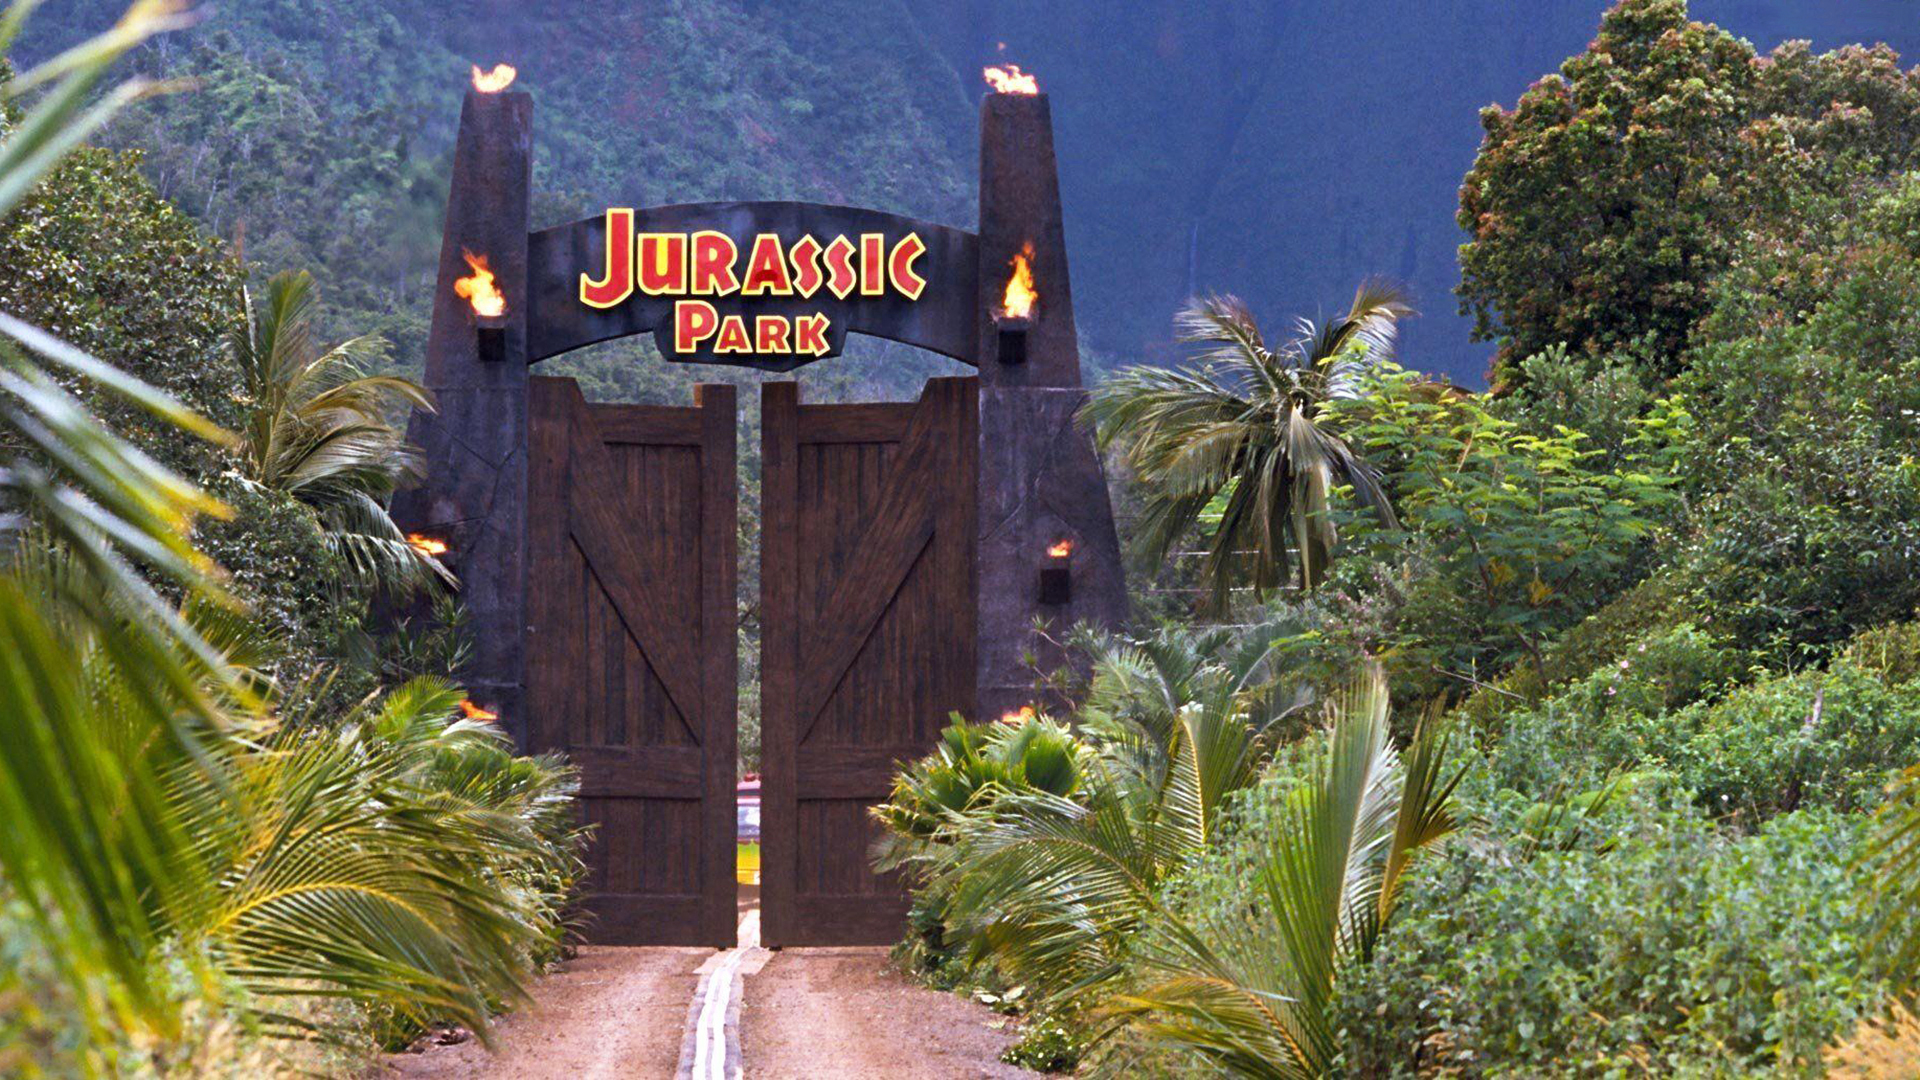 Jurassic Park main gate. Virtual background to use on Zoom, Microsoft Teams, Skype, Google Meet, WebEx or any other compatible app.